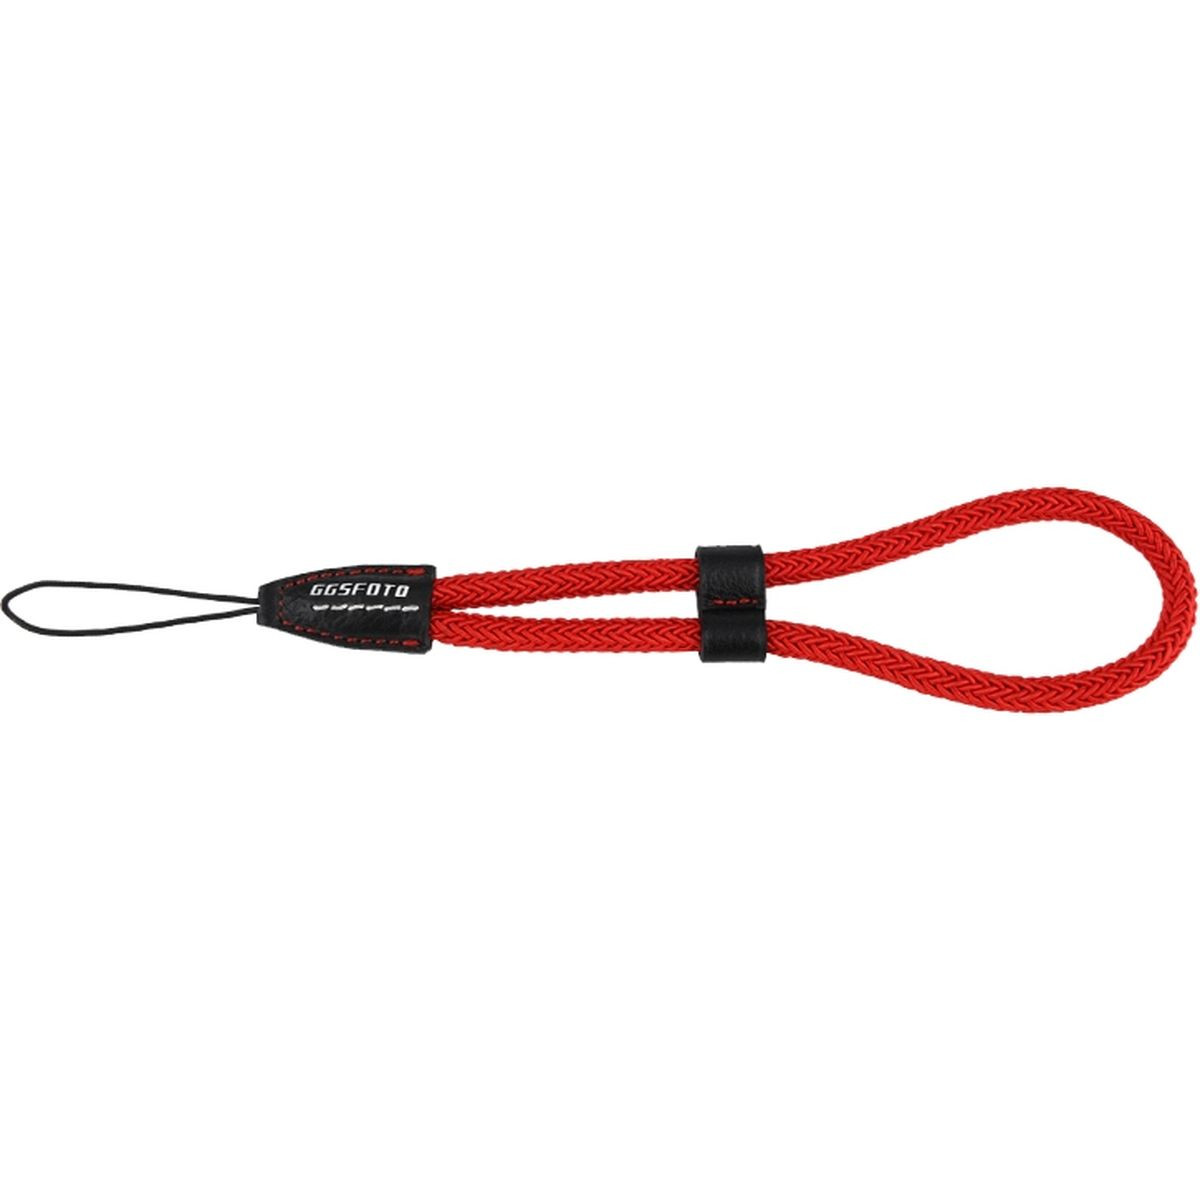 GGS WS-1BR Red Wriststrap TiedOn